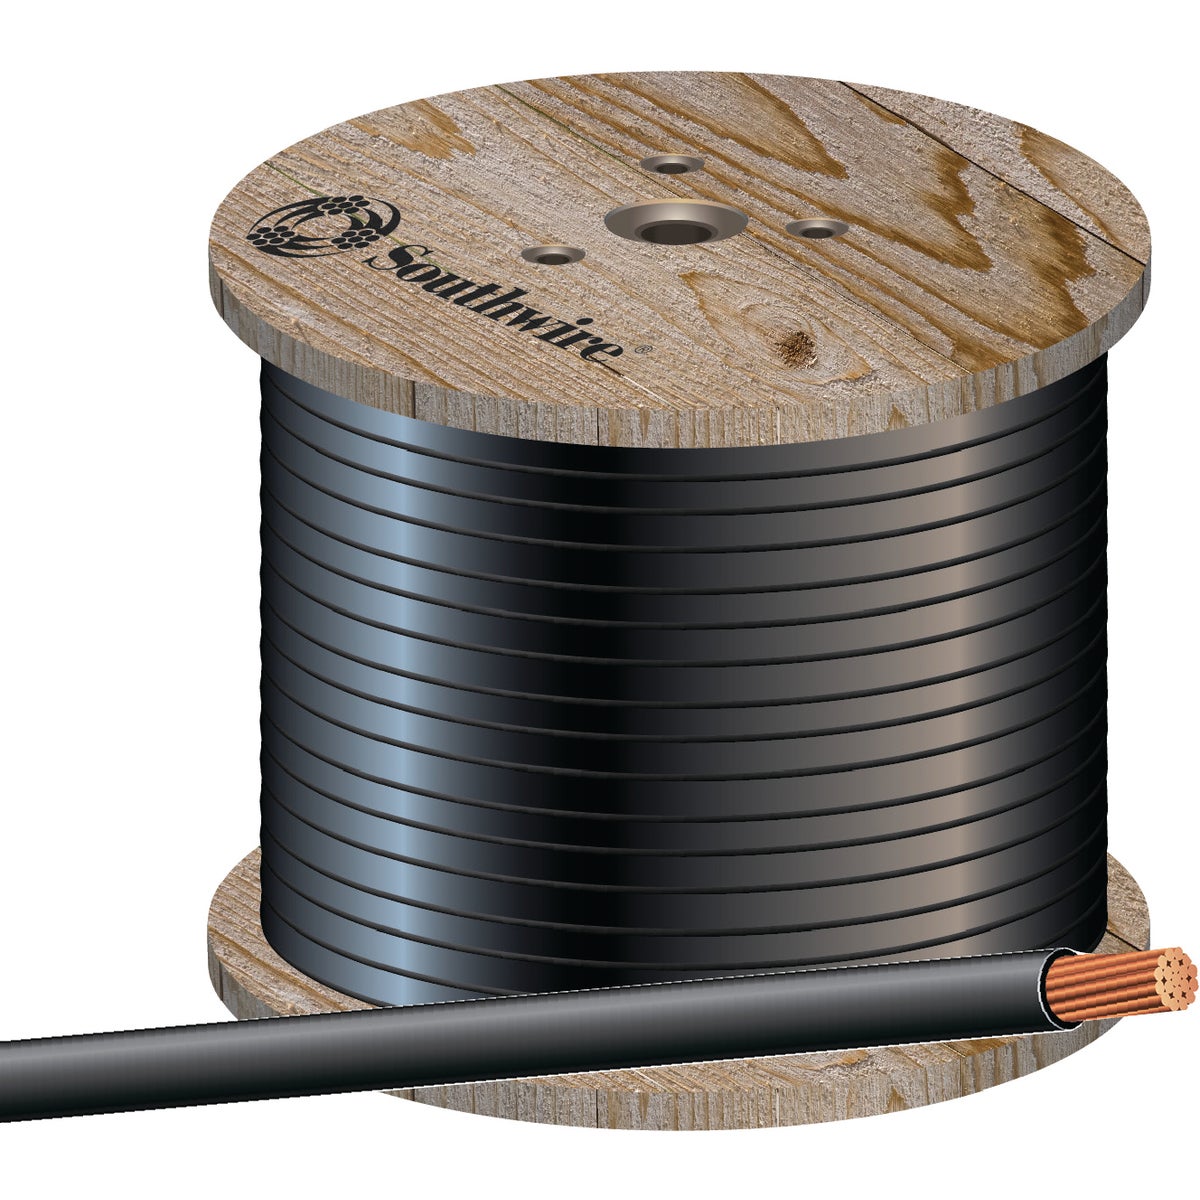 Southwire 500 Ft. 18 Ga. Copper Dog Fence Cable